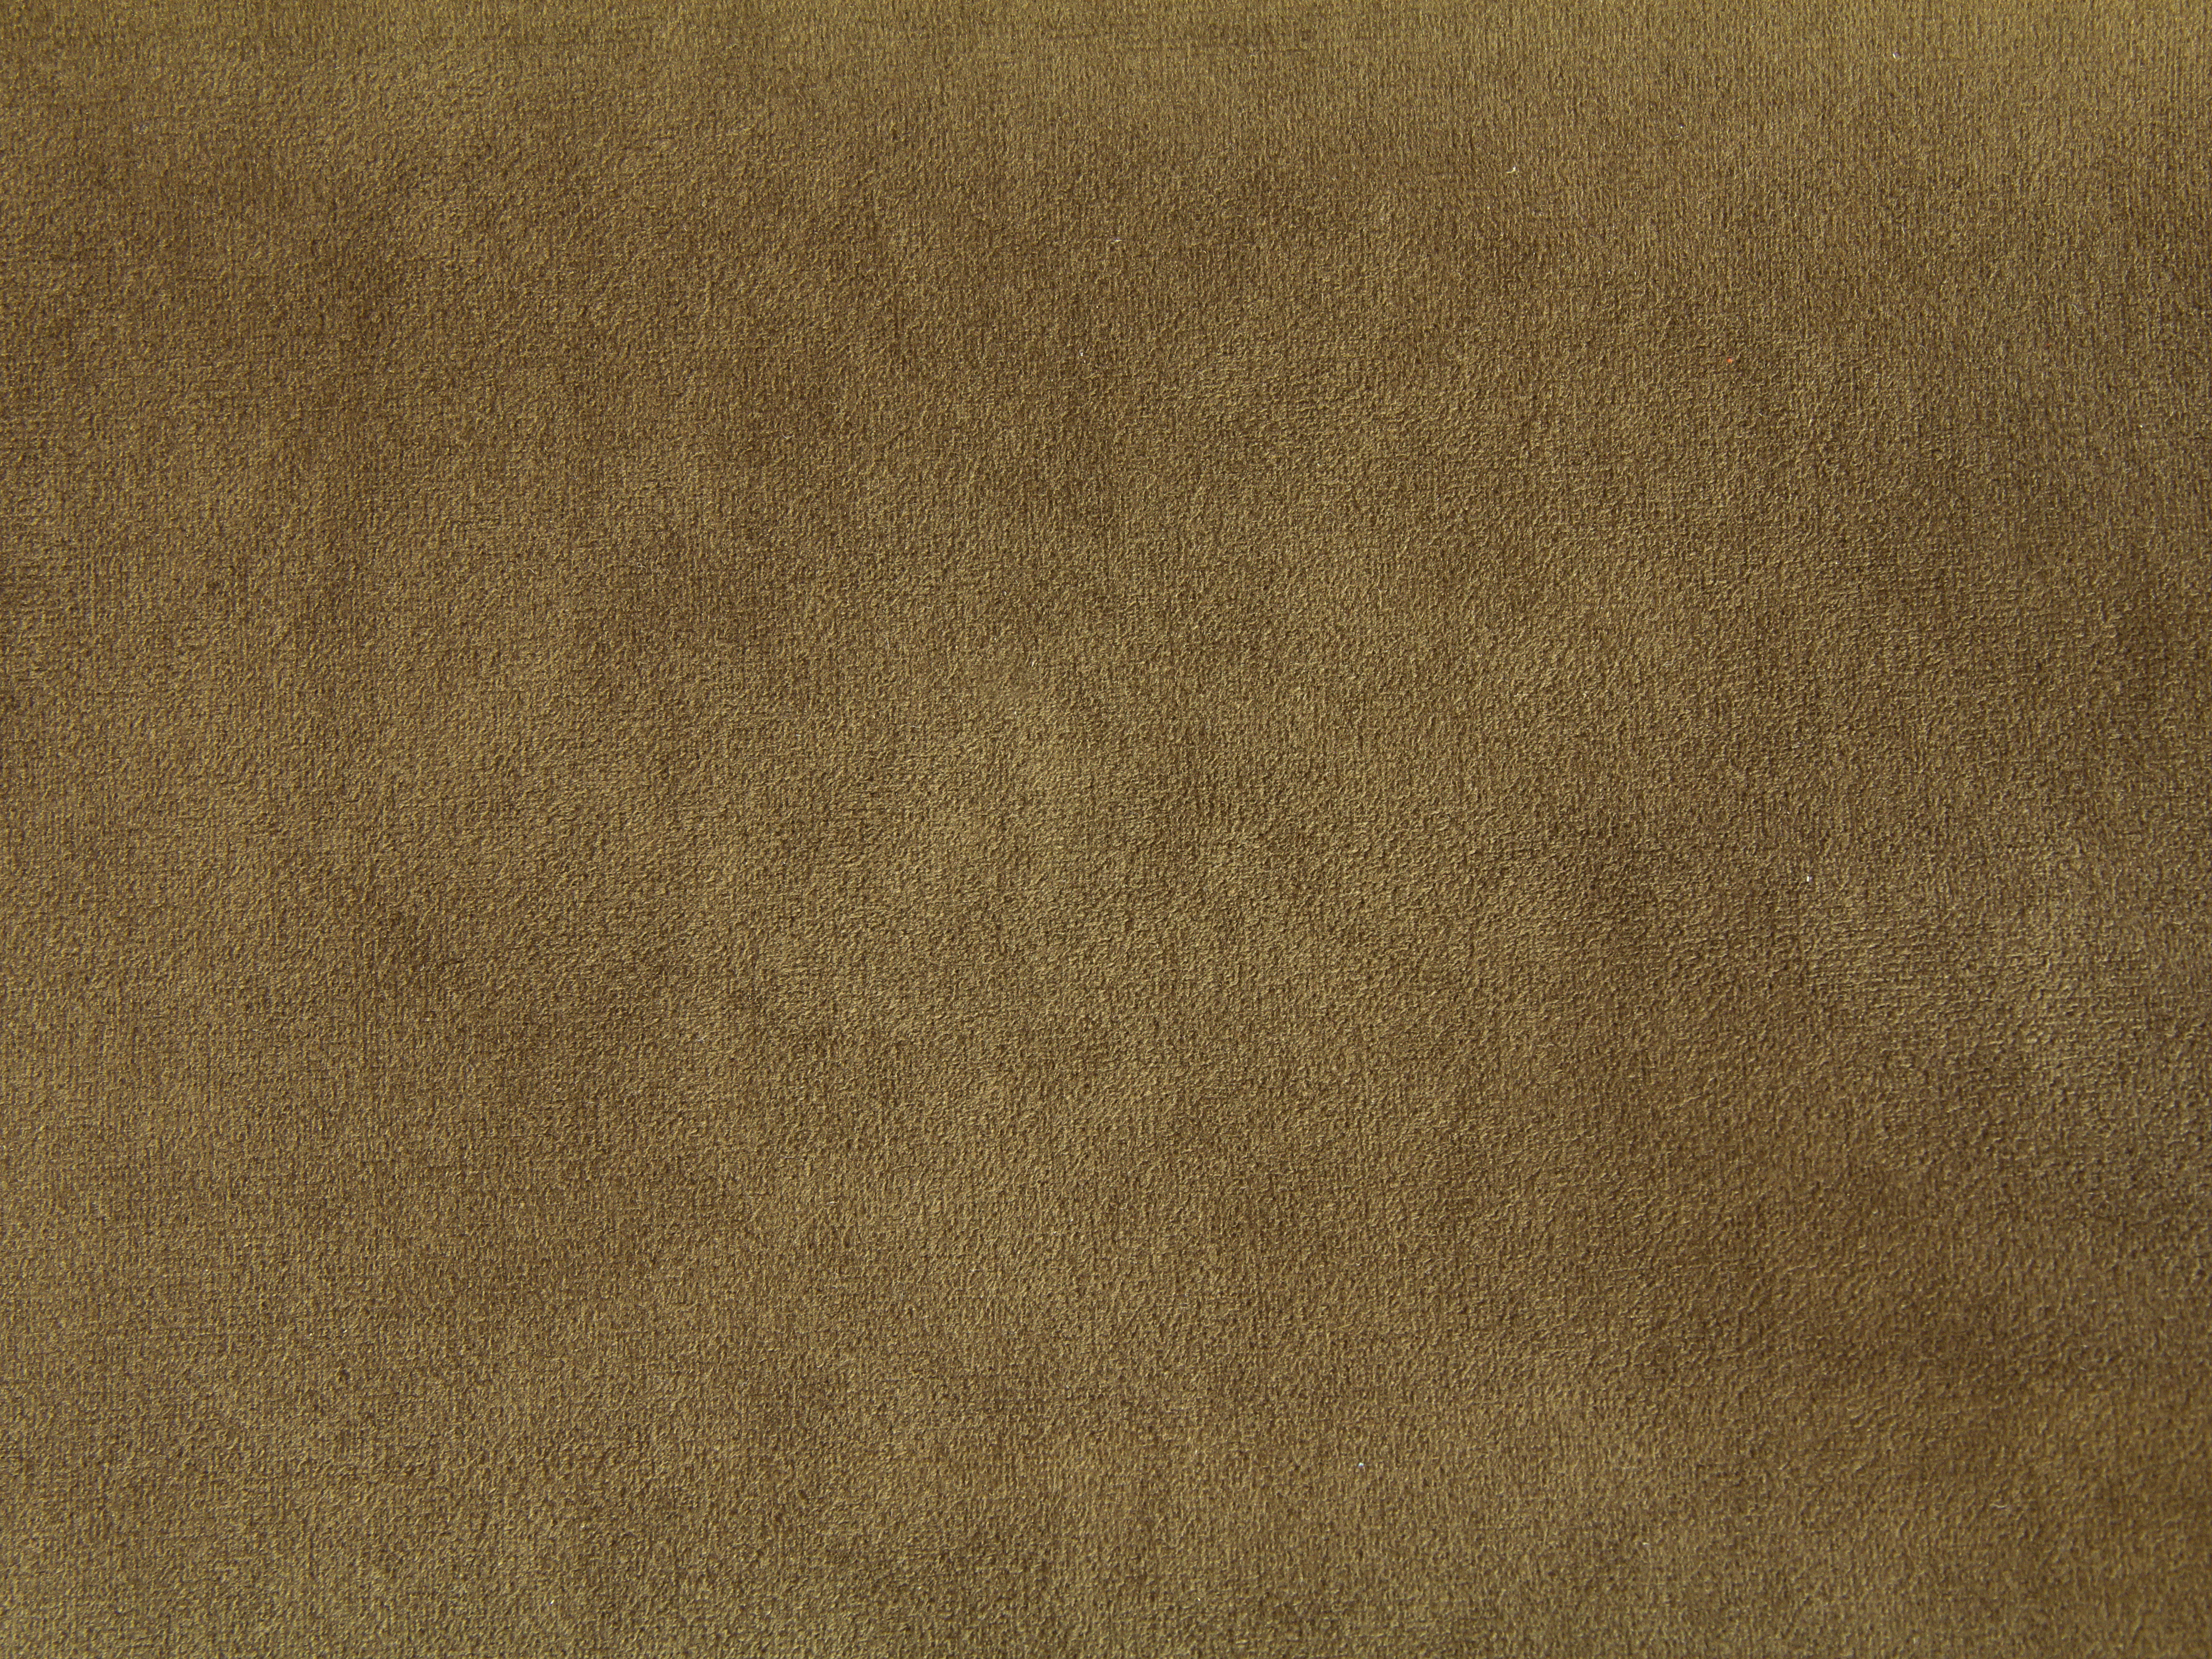 soft furry fabric texture background Stock Photo